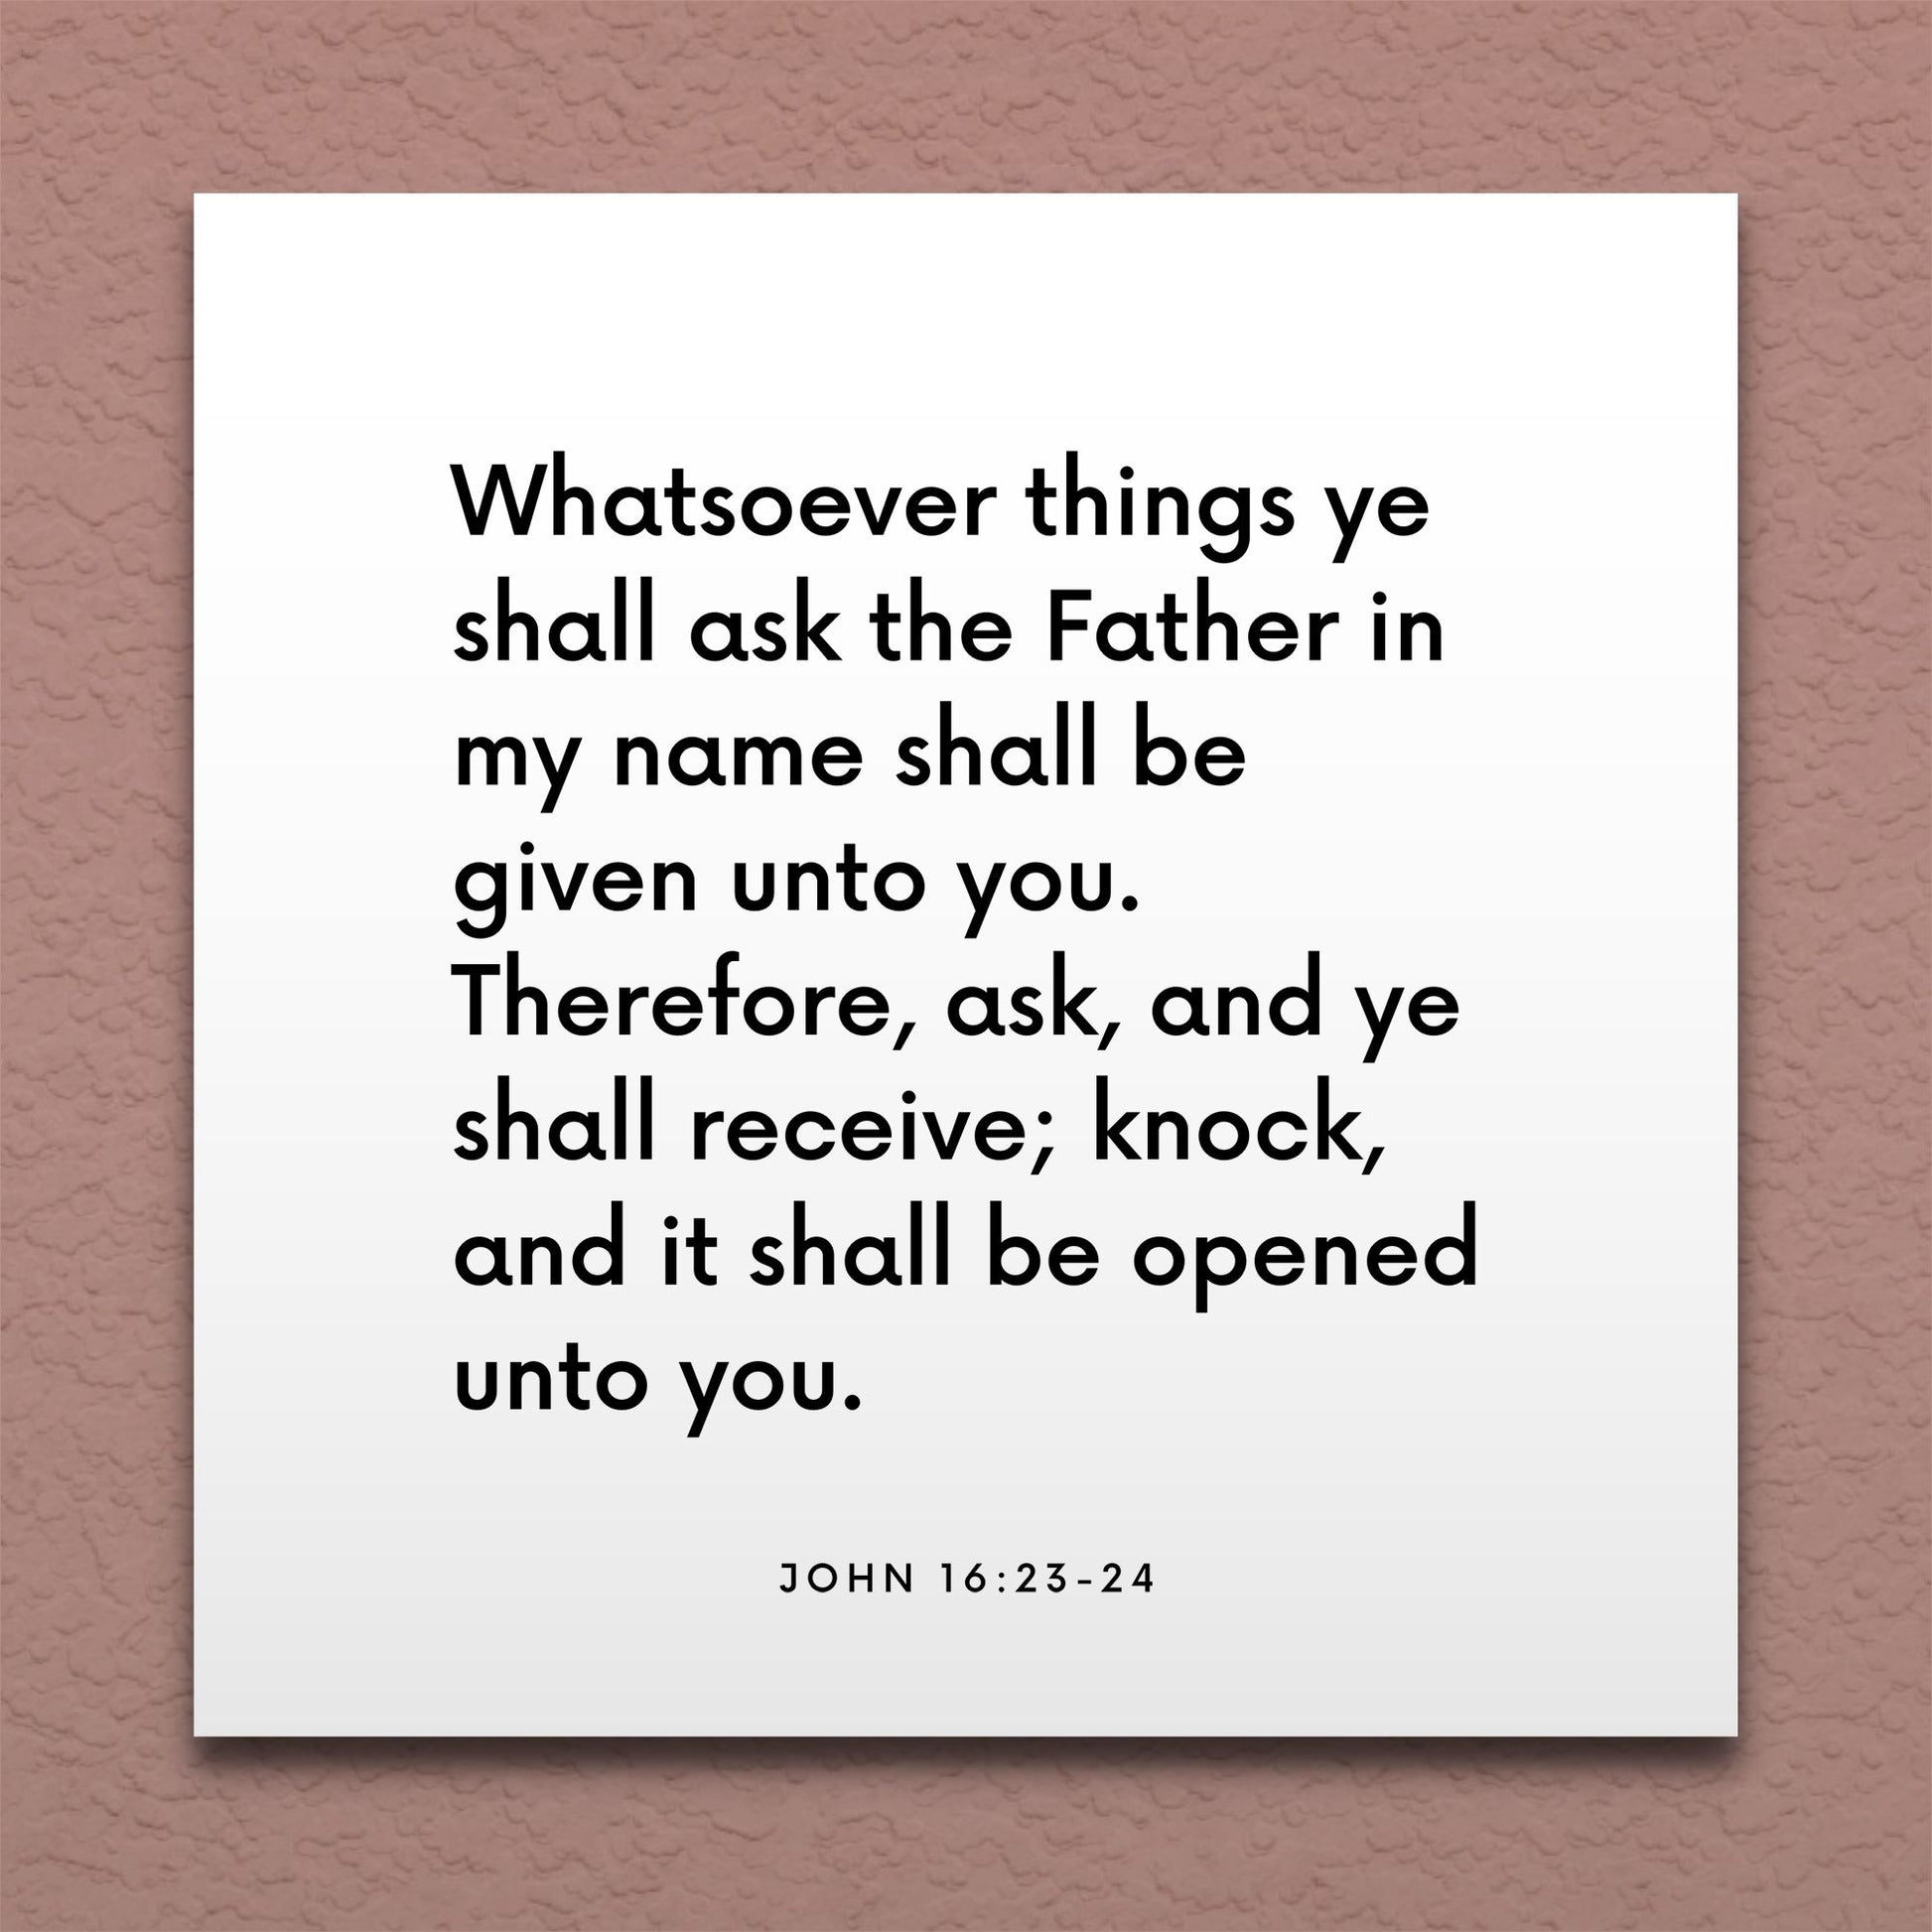 Wall-mounted scripture tile for John 16:23-24 - "Whatsoever things ye shall ask the Father in my name"